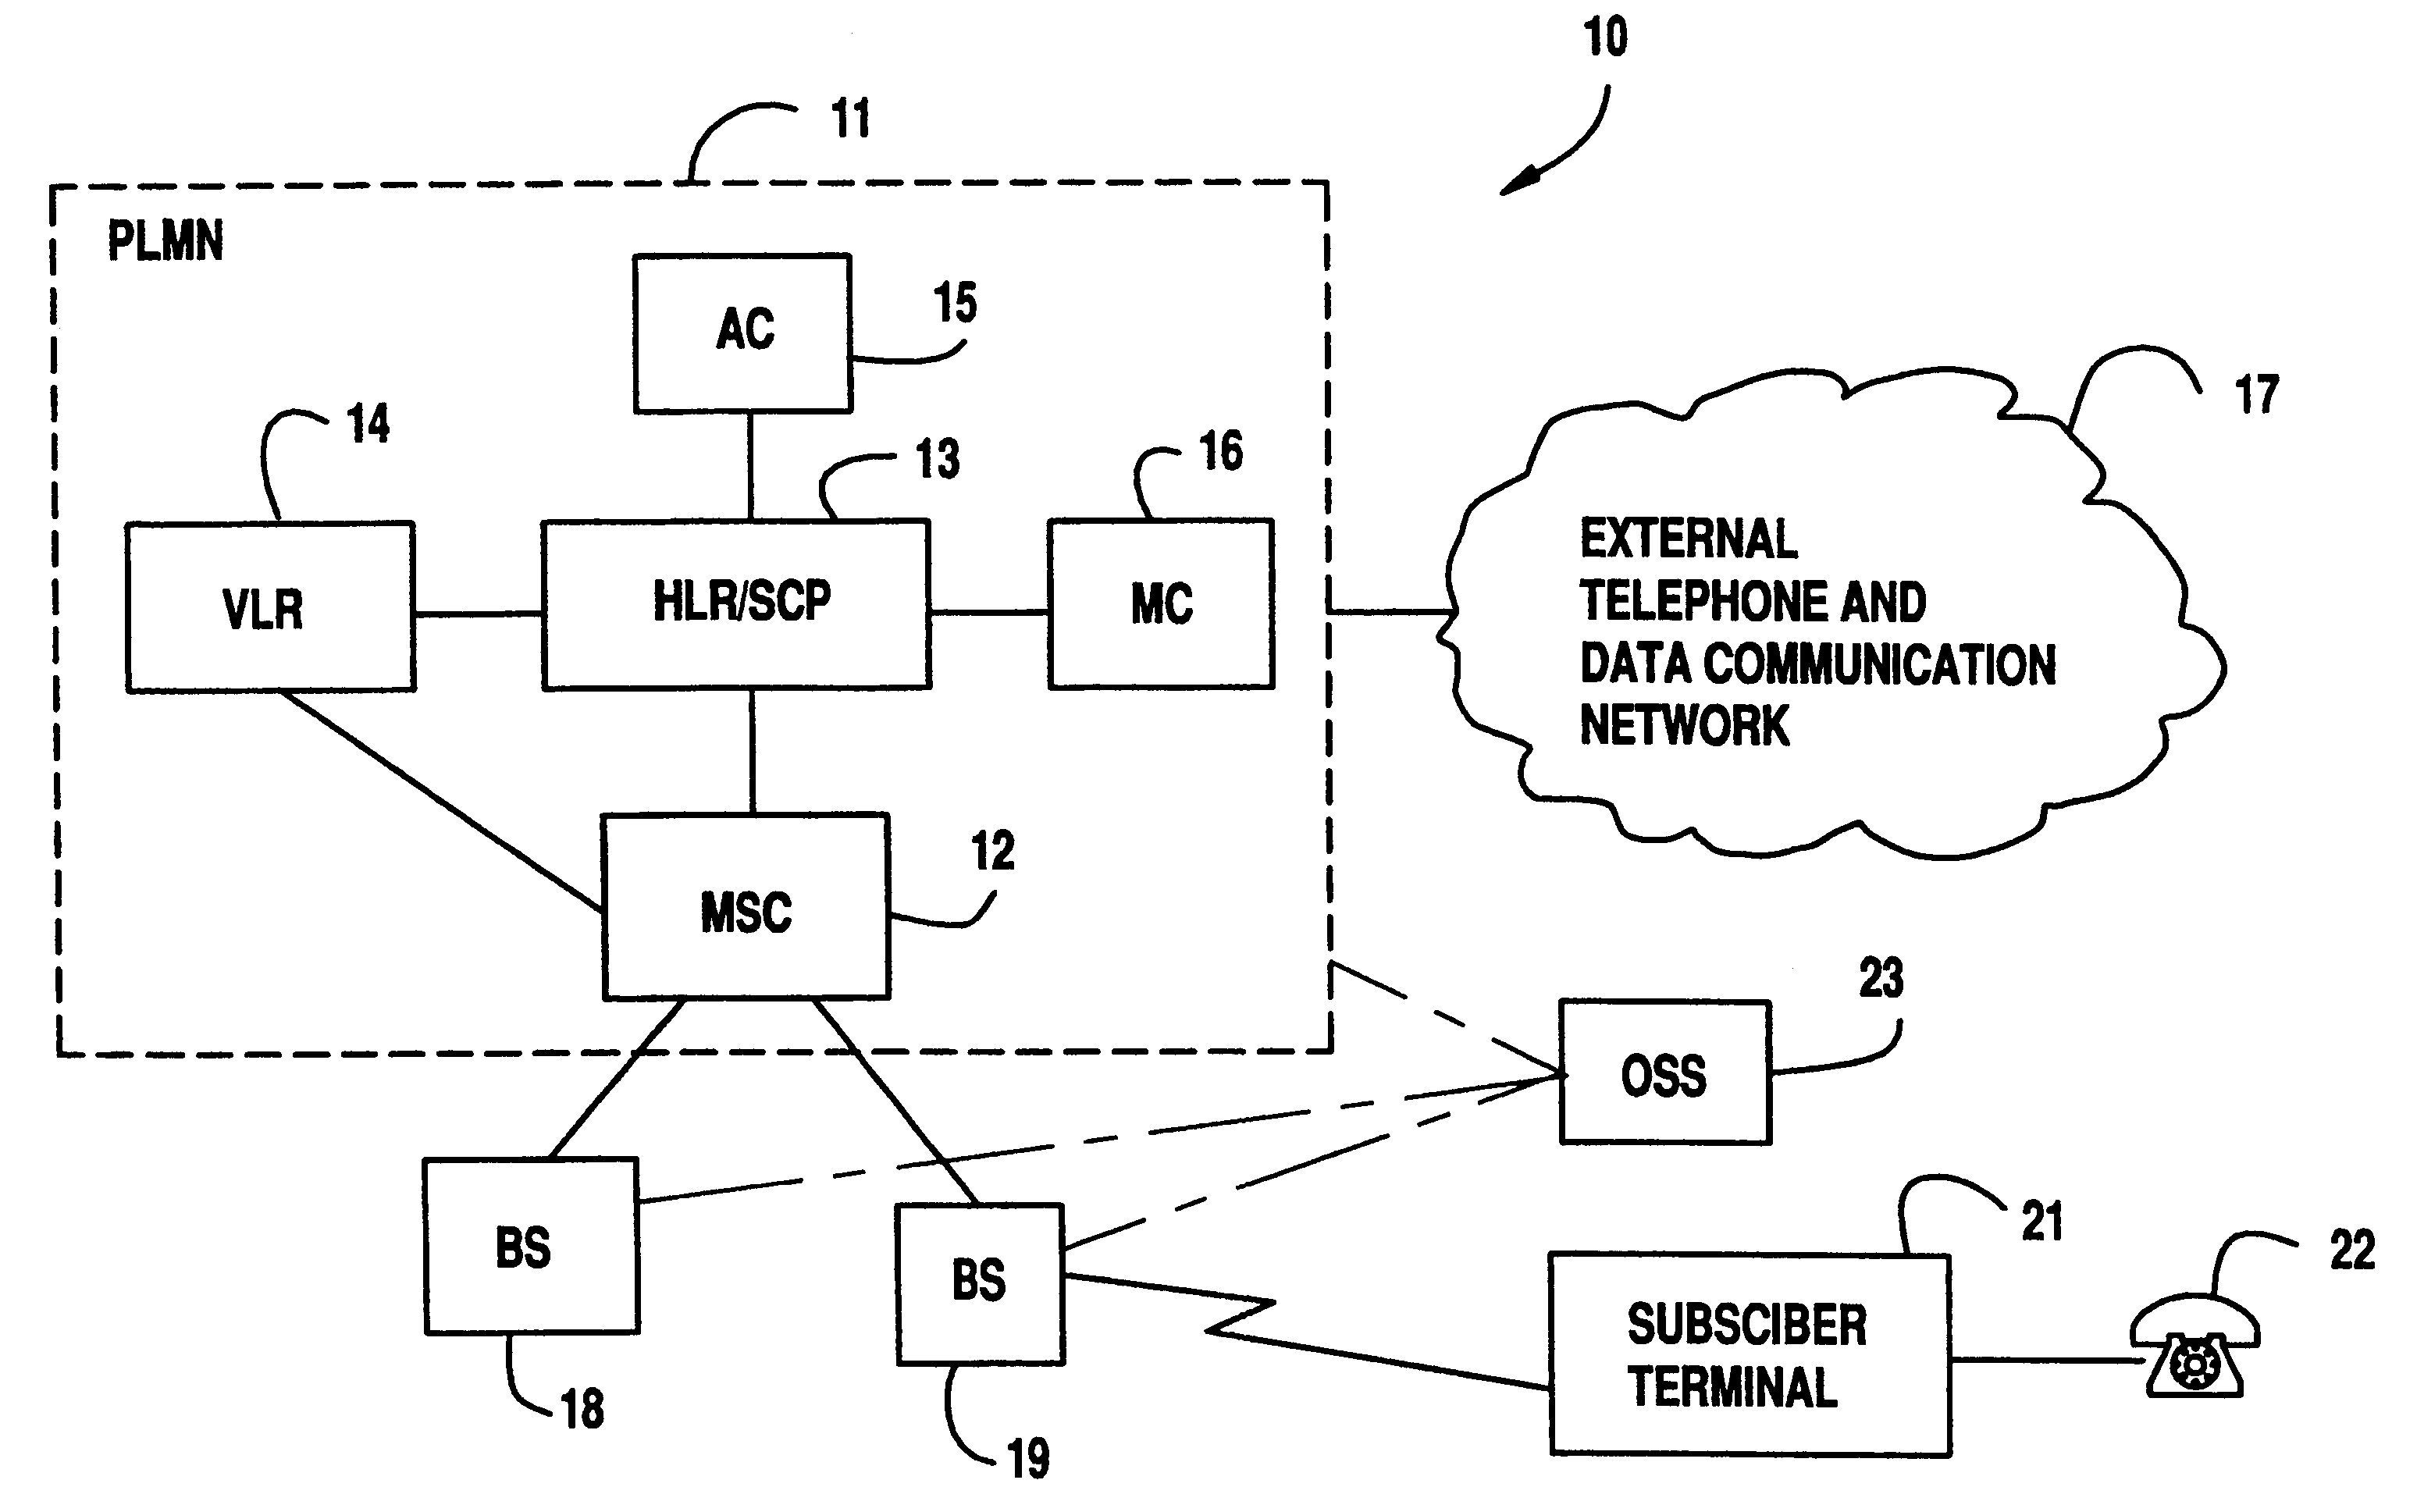 System and method of providing group wireless extension phone service in a radio telecommunications network